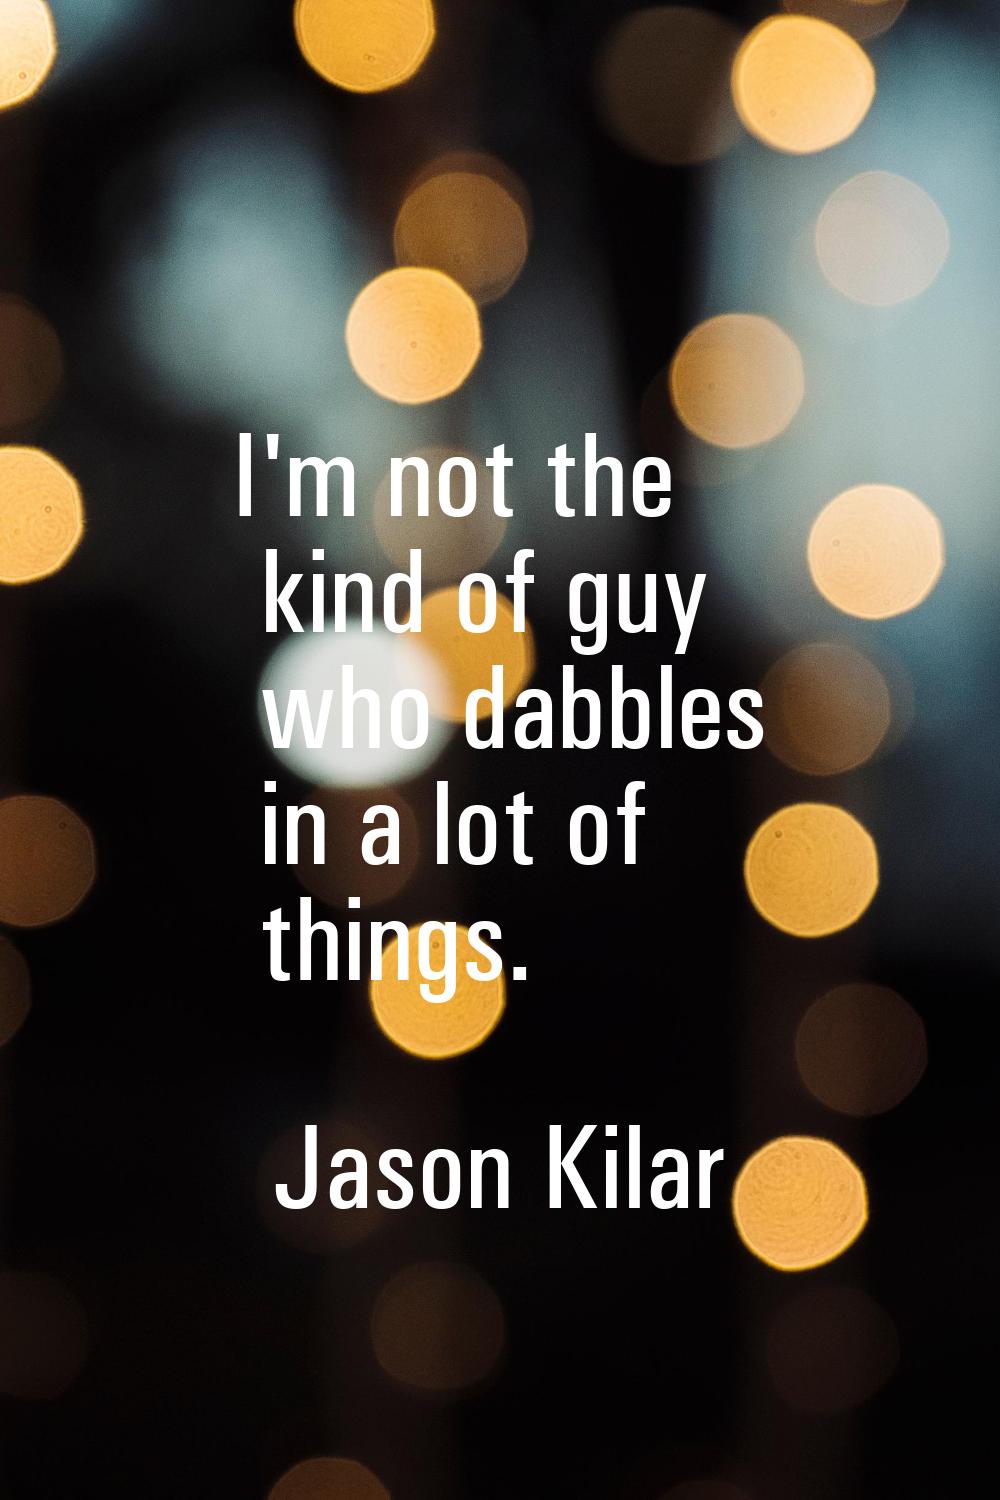 I'm not the kind of guy who dabbles in a lot of things.